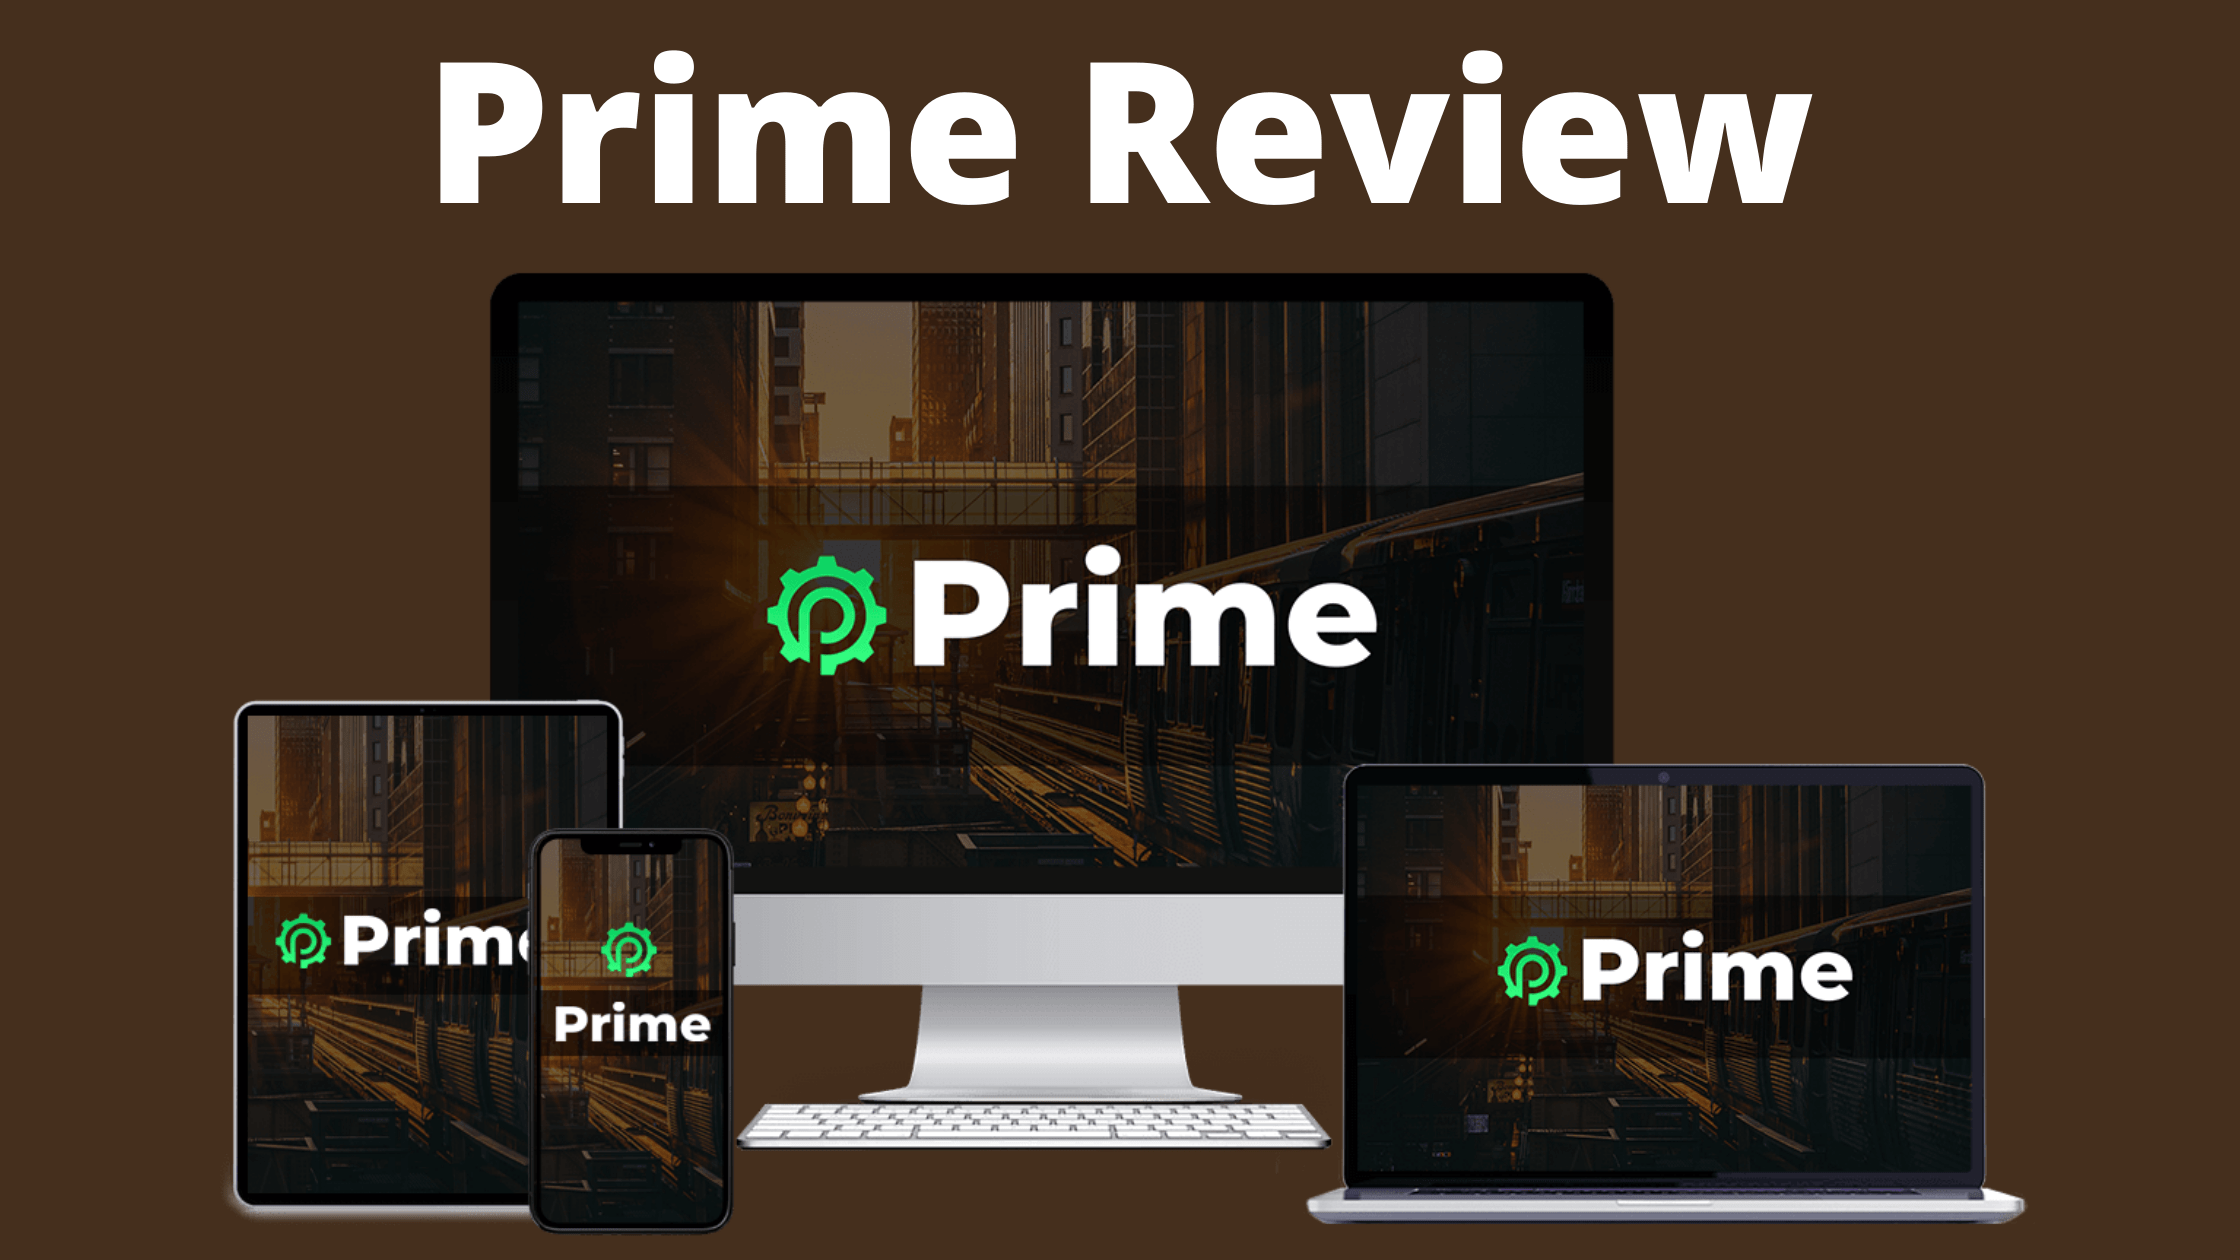 Prime Review